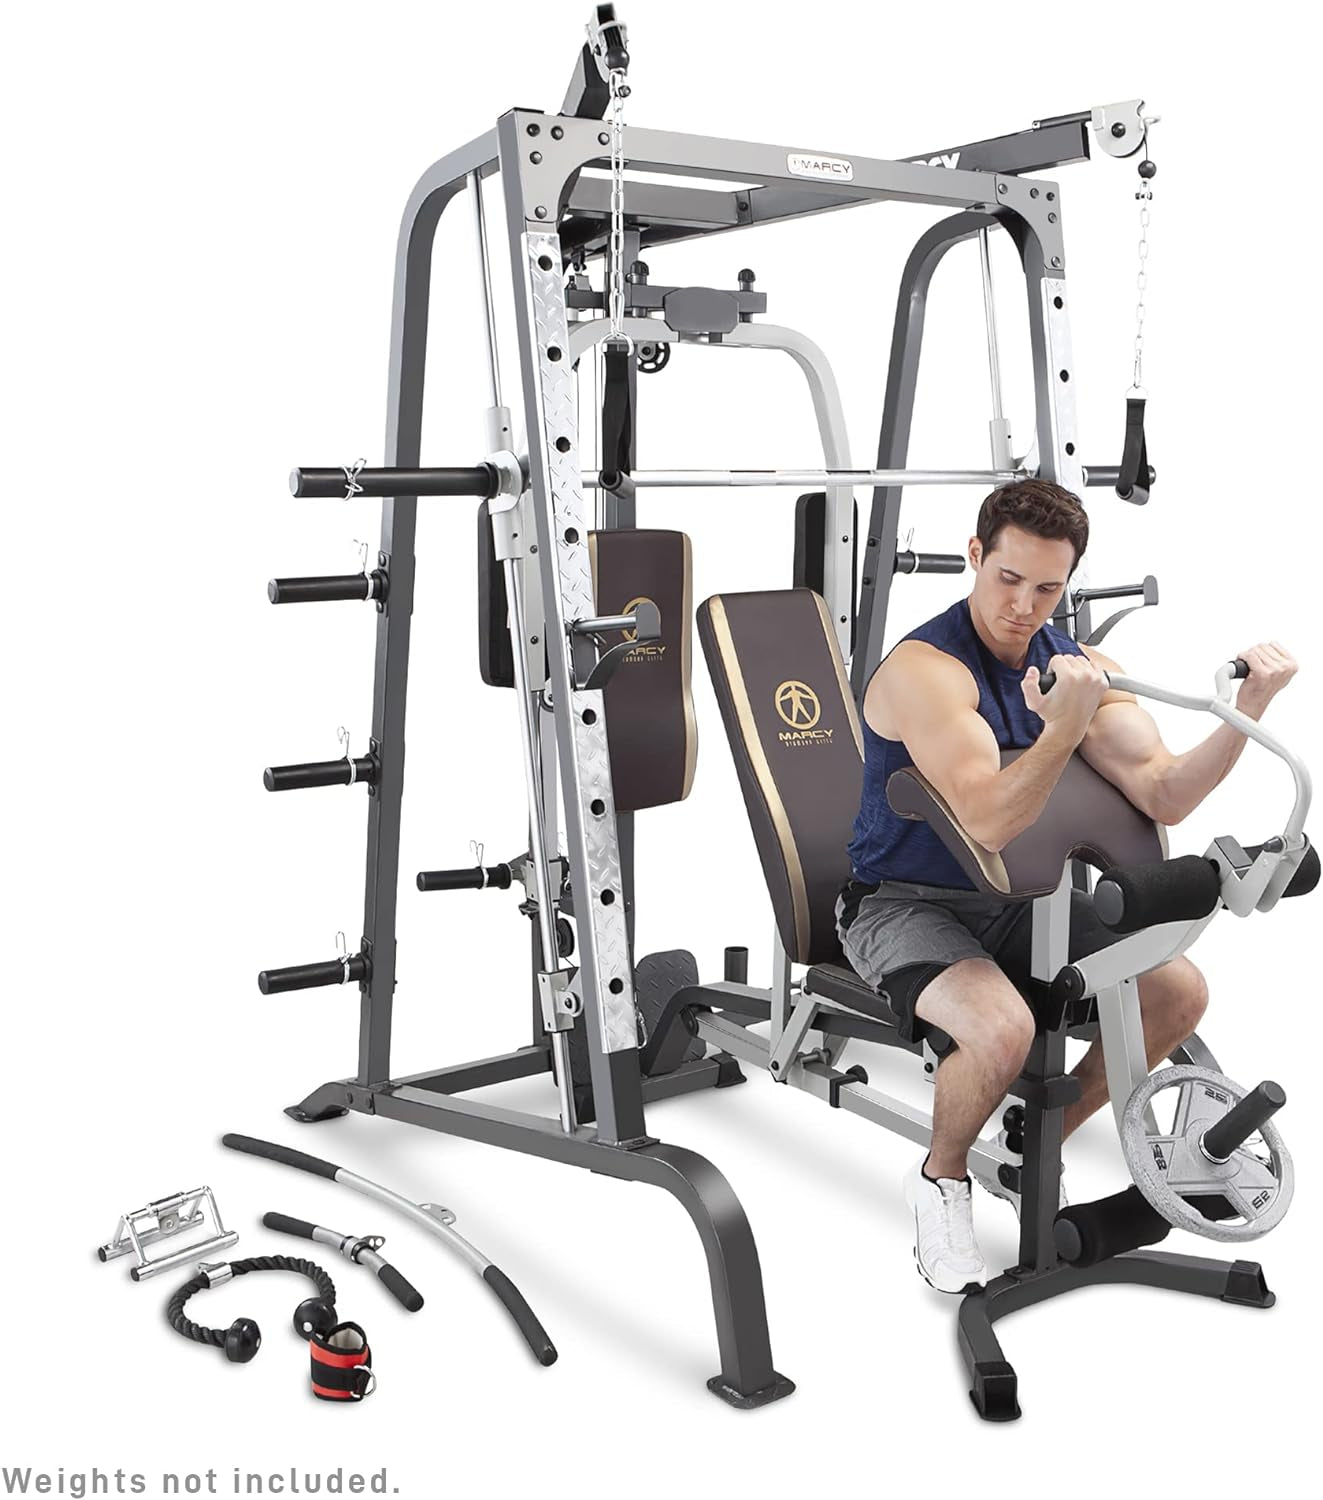 "Ultimate Home Gym System: Pro Smith Cage Workout Machine for Full Body Training with Leg Developer, Press Bar, Cable Crossovers, and Squat Rack in Stylish White"